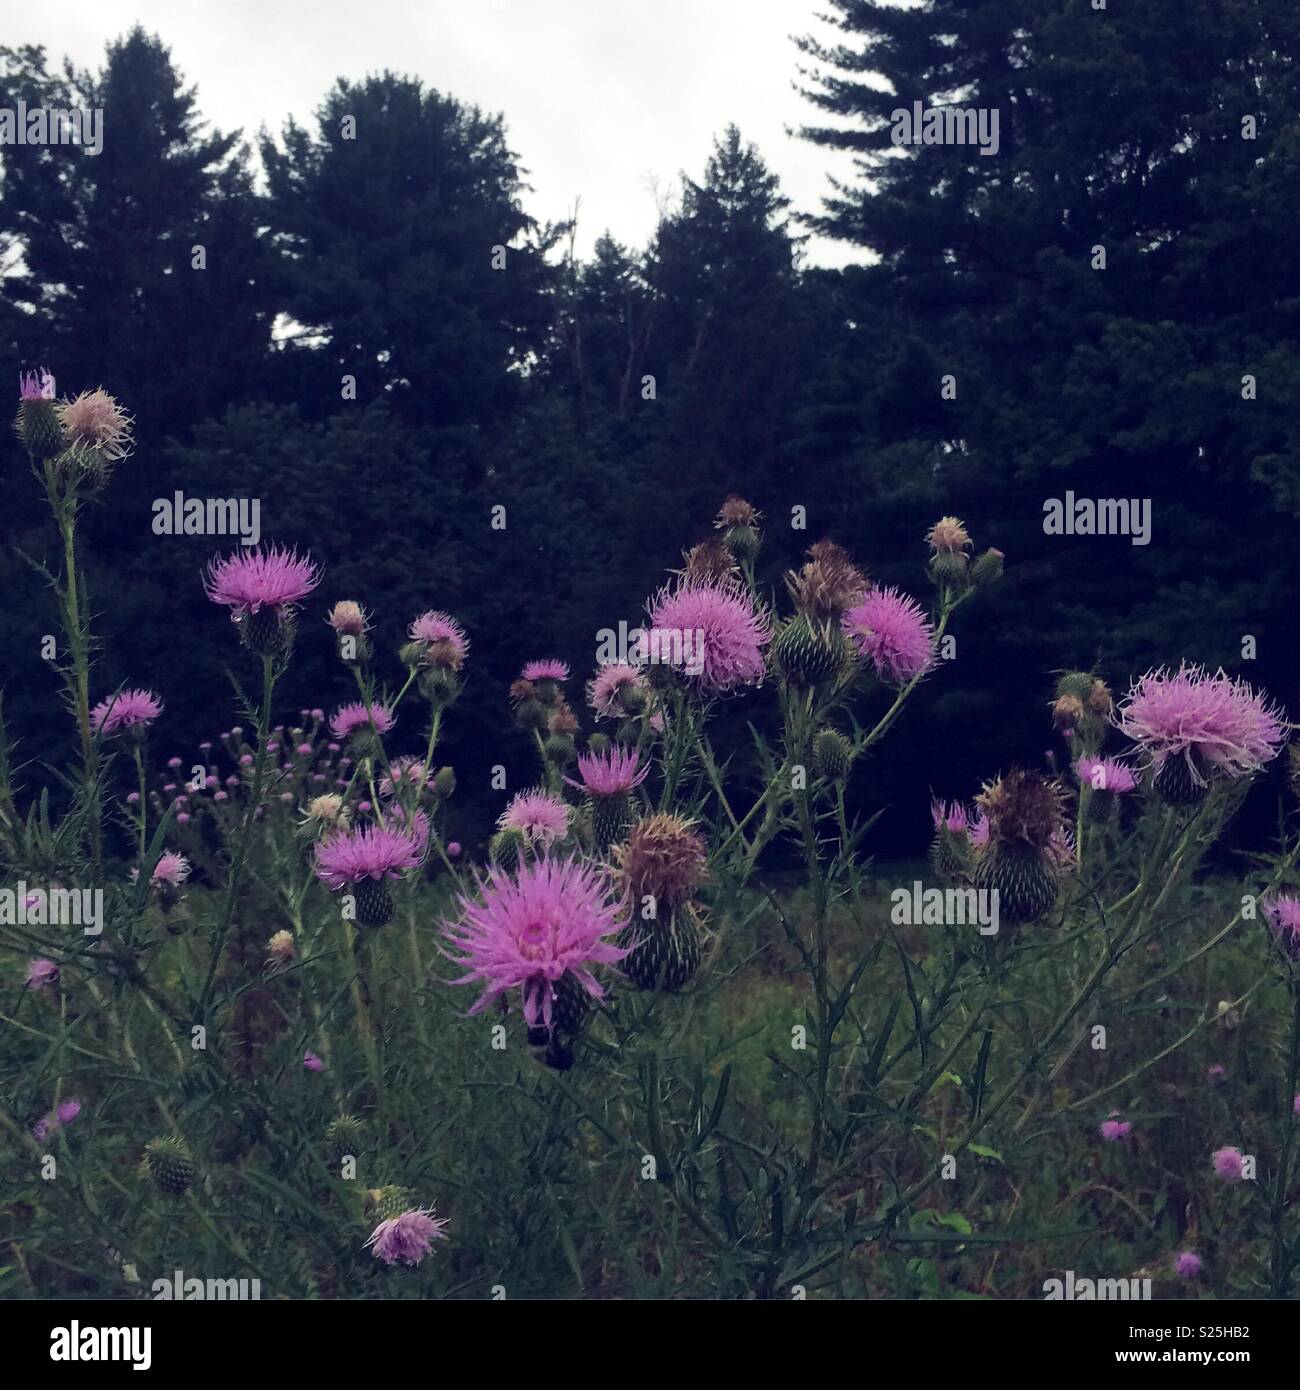 Pink thistles in the foreground with dark green trees in the background Stock Photo